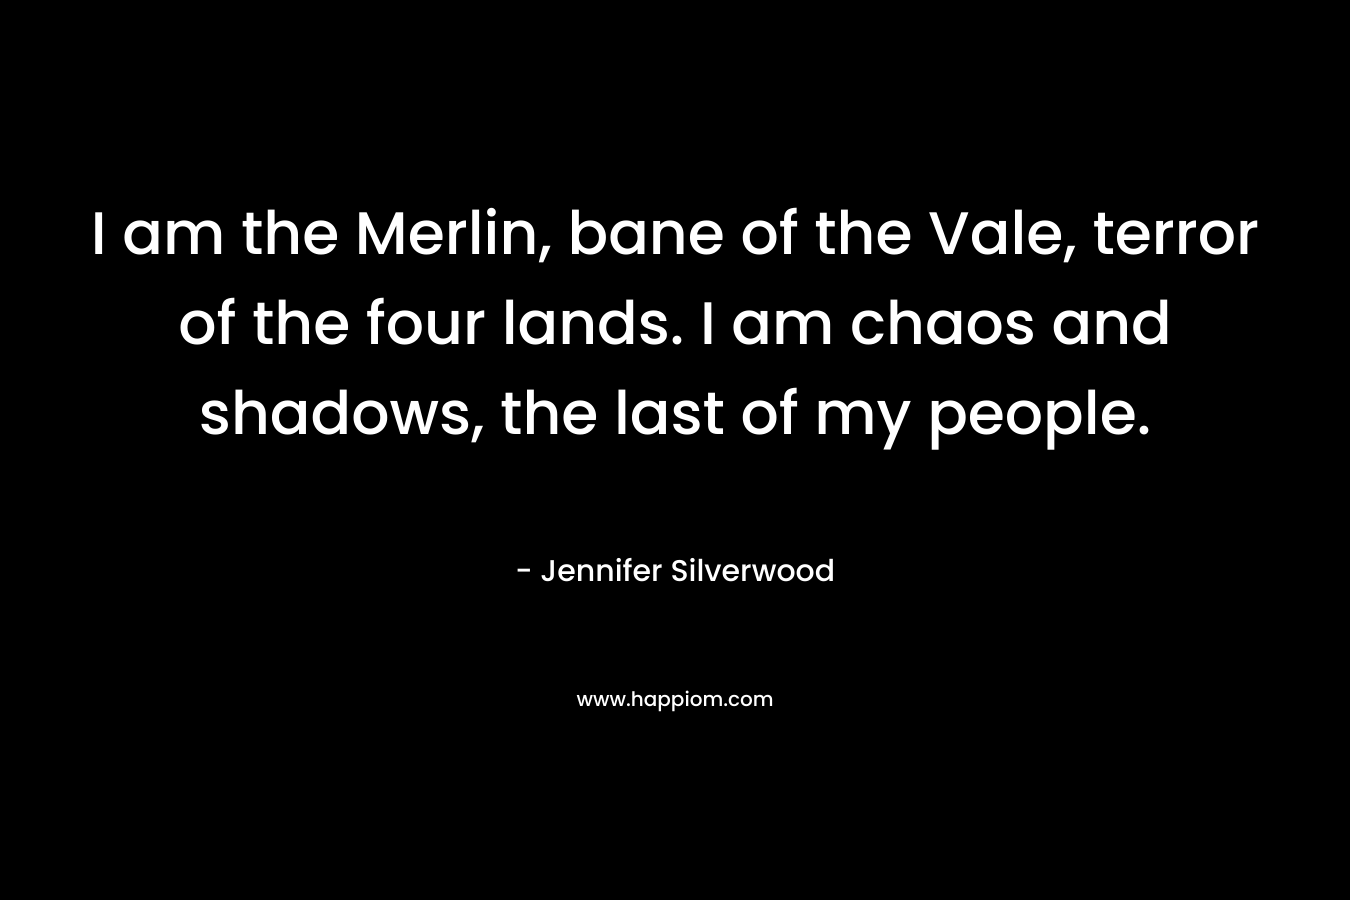 I am the Merlin, bane of the Vale, terror of the four lands. I am chaos and shadows, the last of my people. – Jennifer Silverwood